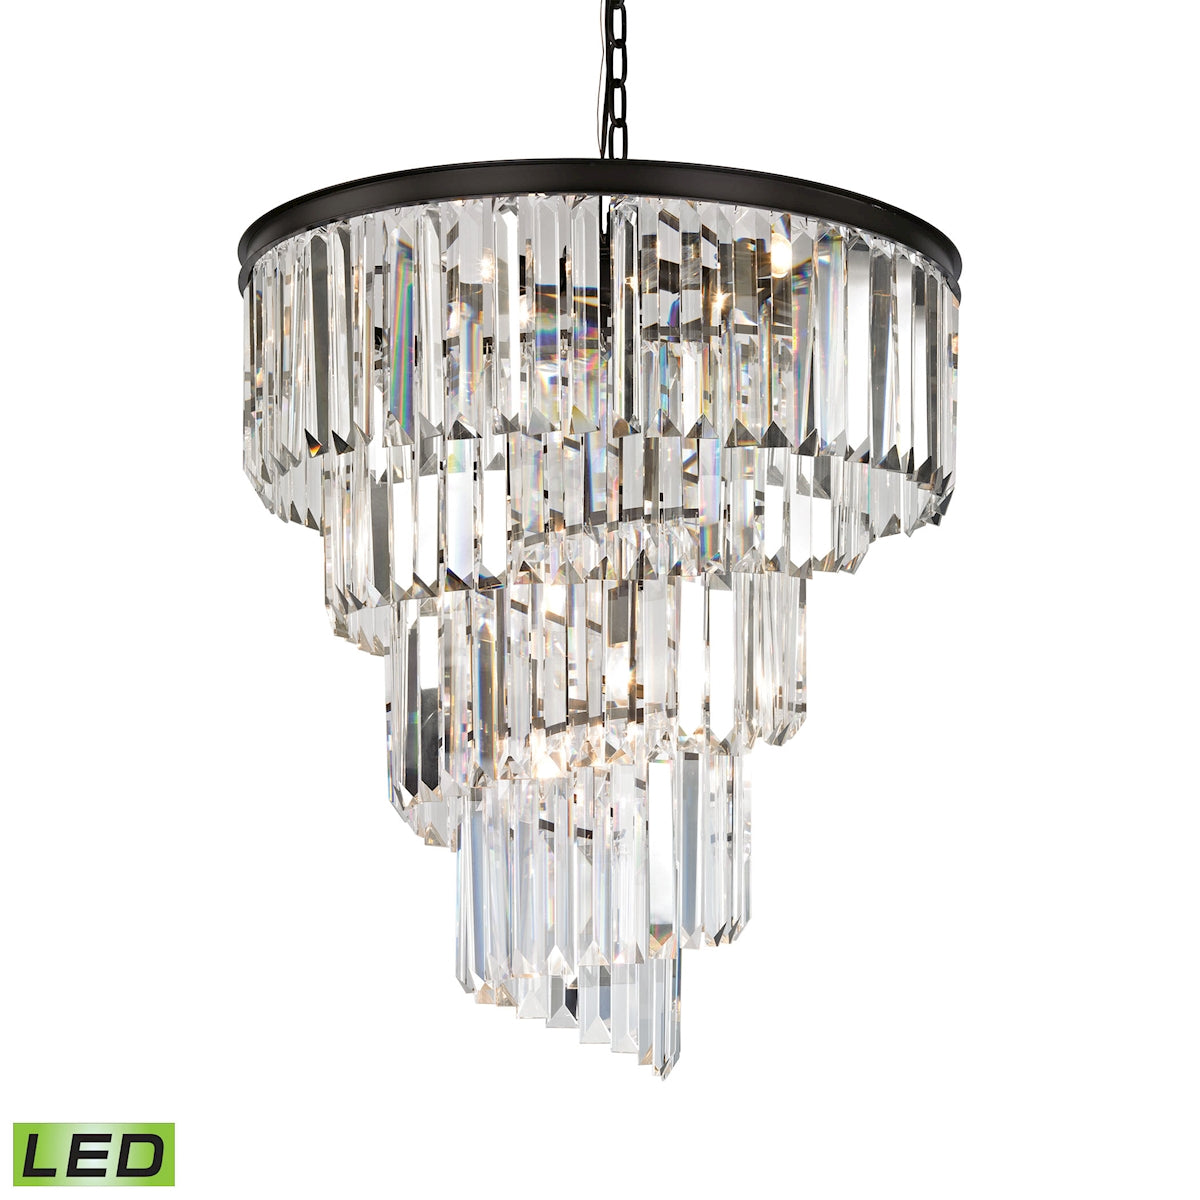 ELK Lighting 14218/9-LED Palacial 9-Light Chandelier in Oil Rubbed Bronze with Clear Crystal - Includes LED Bulbs